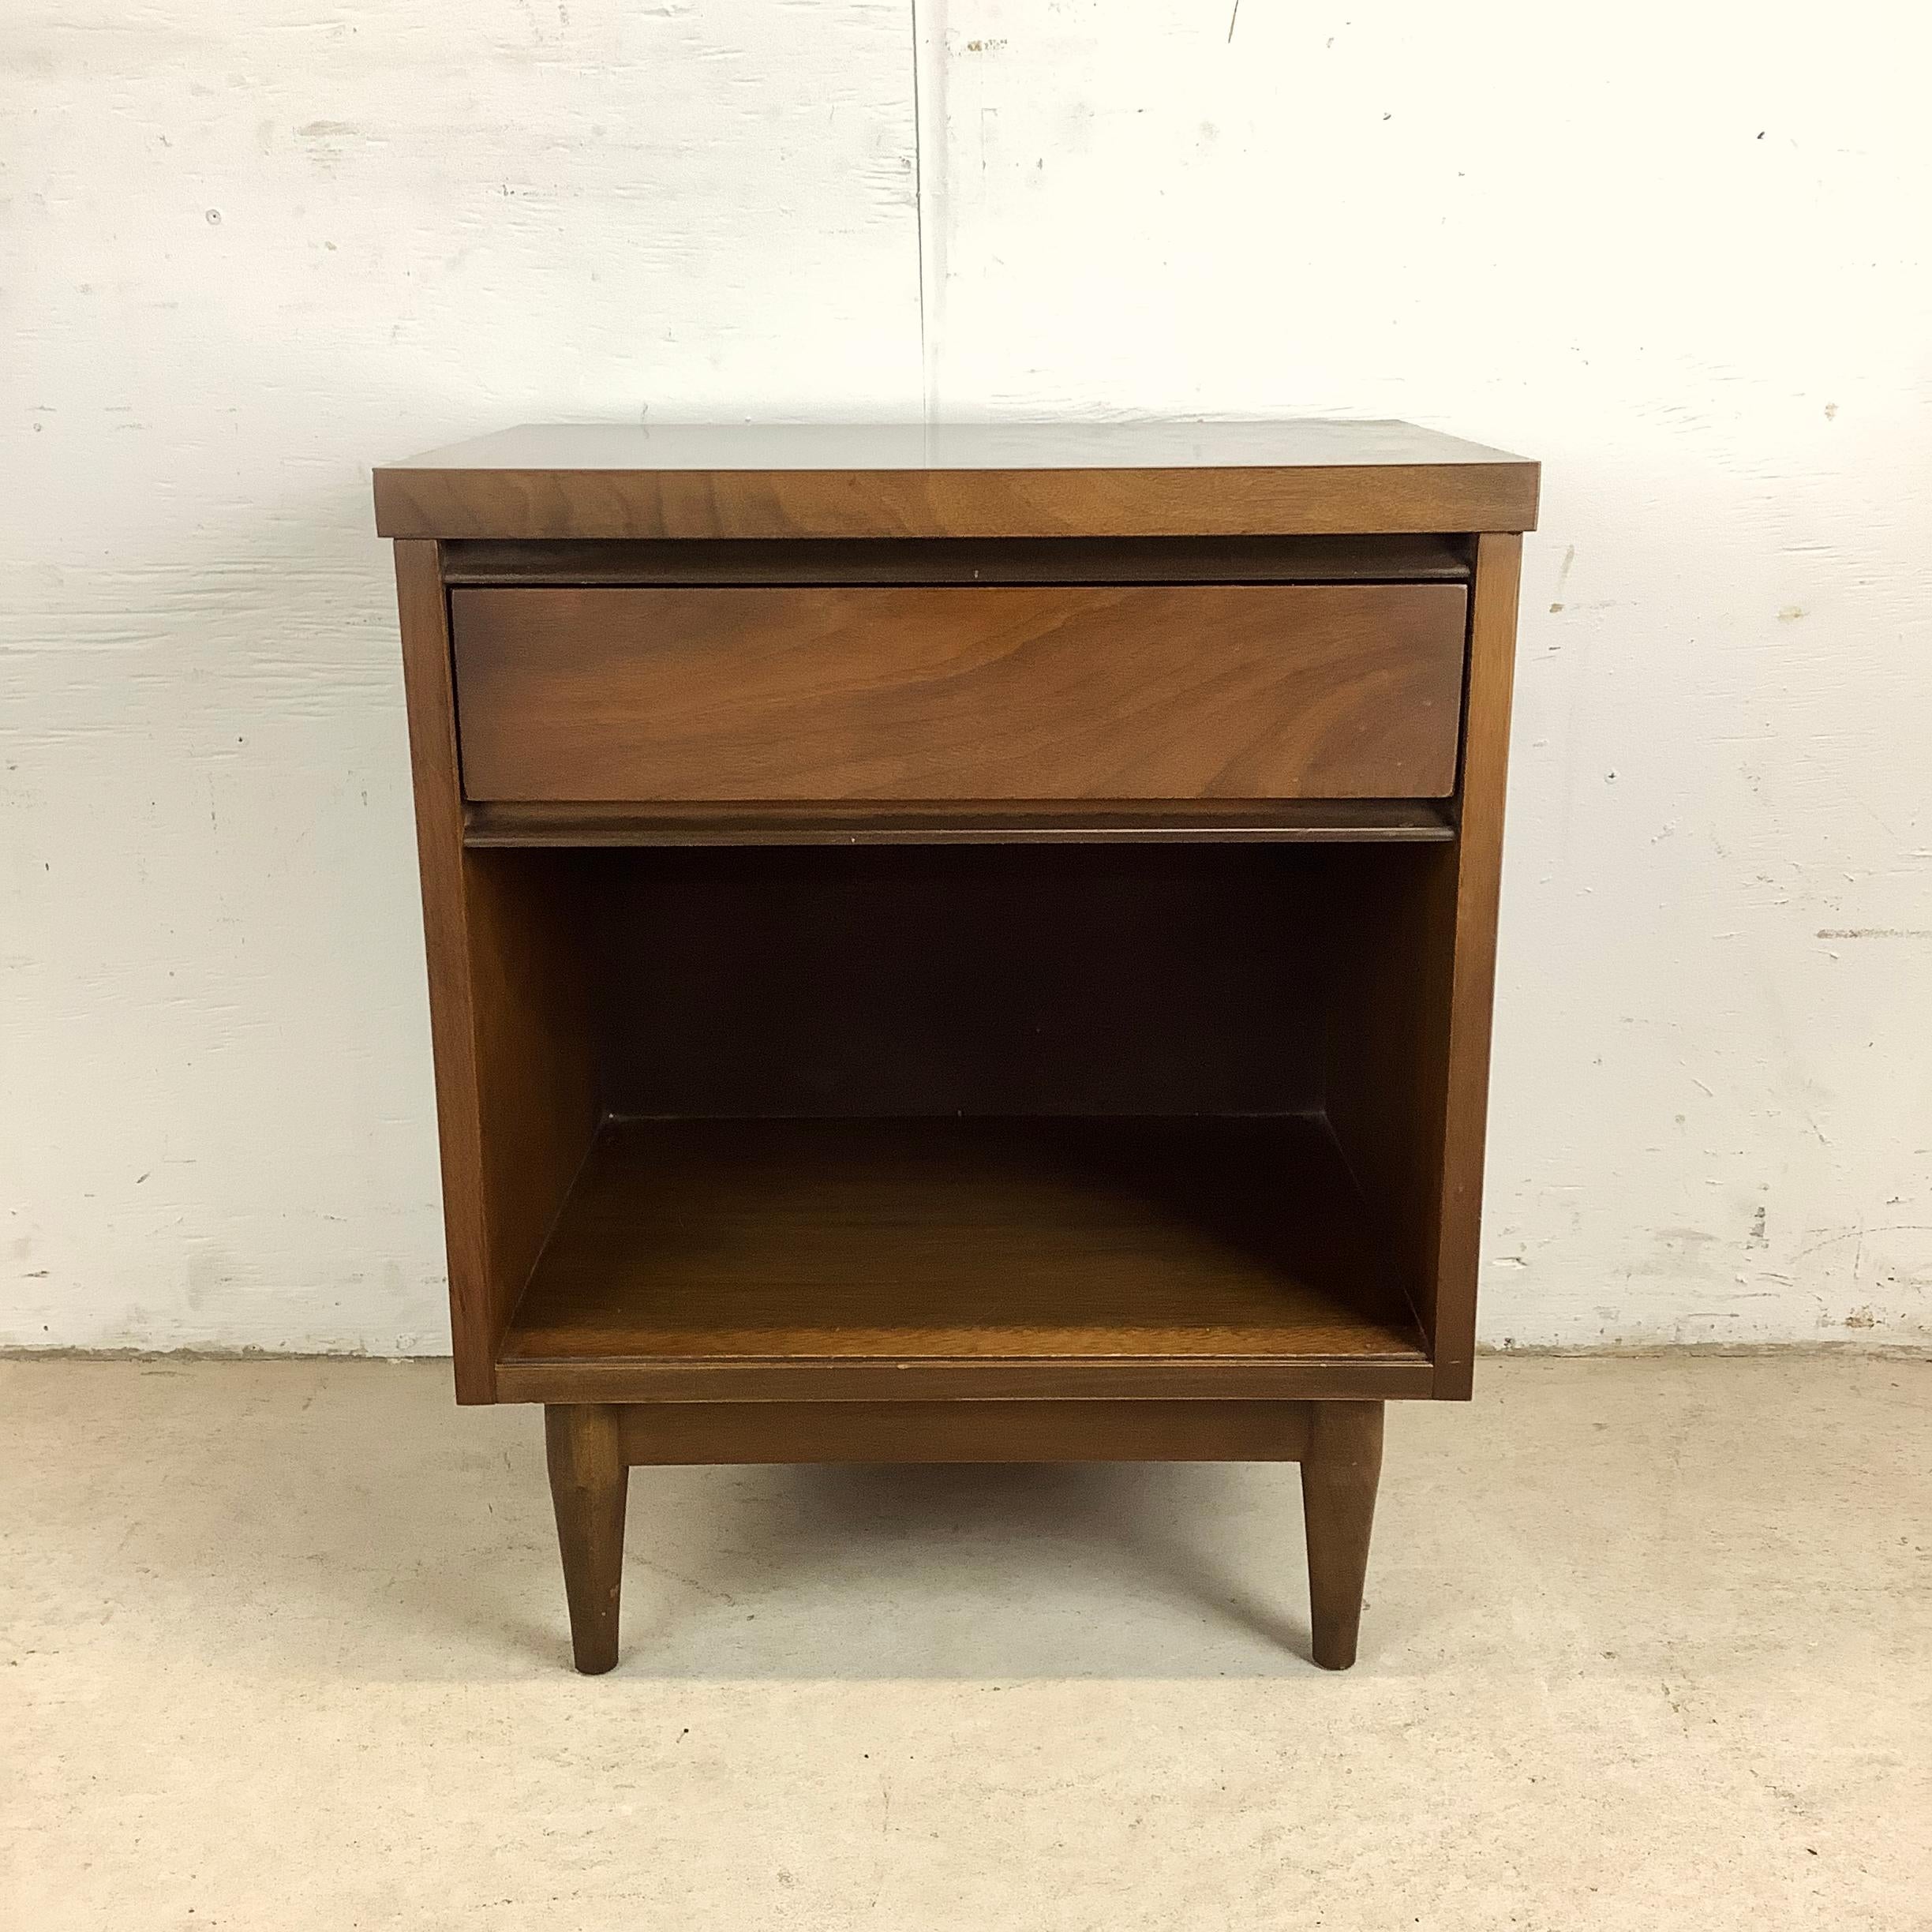 Introduce a touch of mid-century charm to your bedroom with this stylish Mid-Century Single Drawer Walnut Nightstand. Crafted with vintage walnut finish, this nightstand boasts a sleek silhouette and minimalist design that epitomizes the elegance of